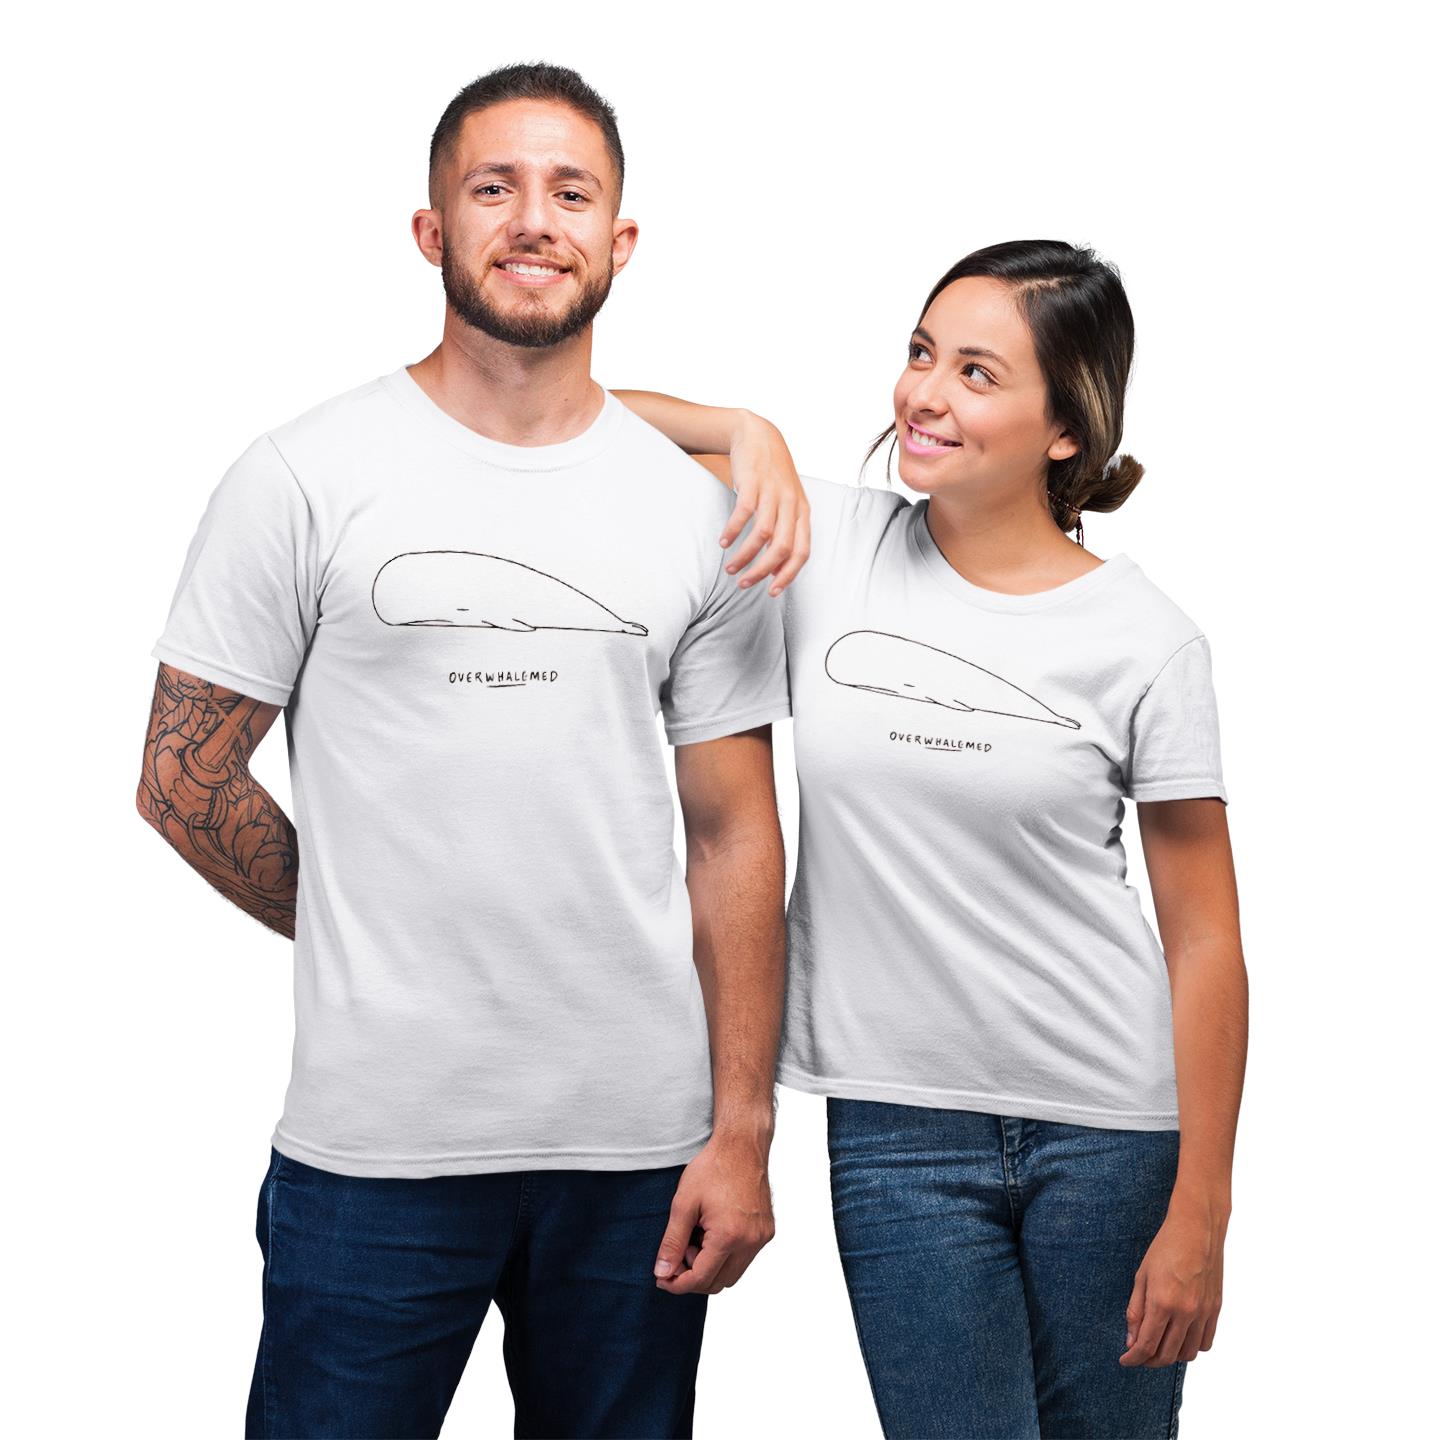 Couple Overwhalemed Funny Shirt For Couple Lover Matching T-shirt